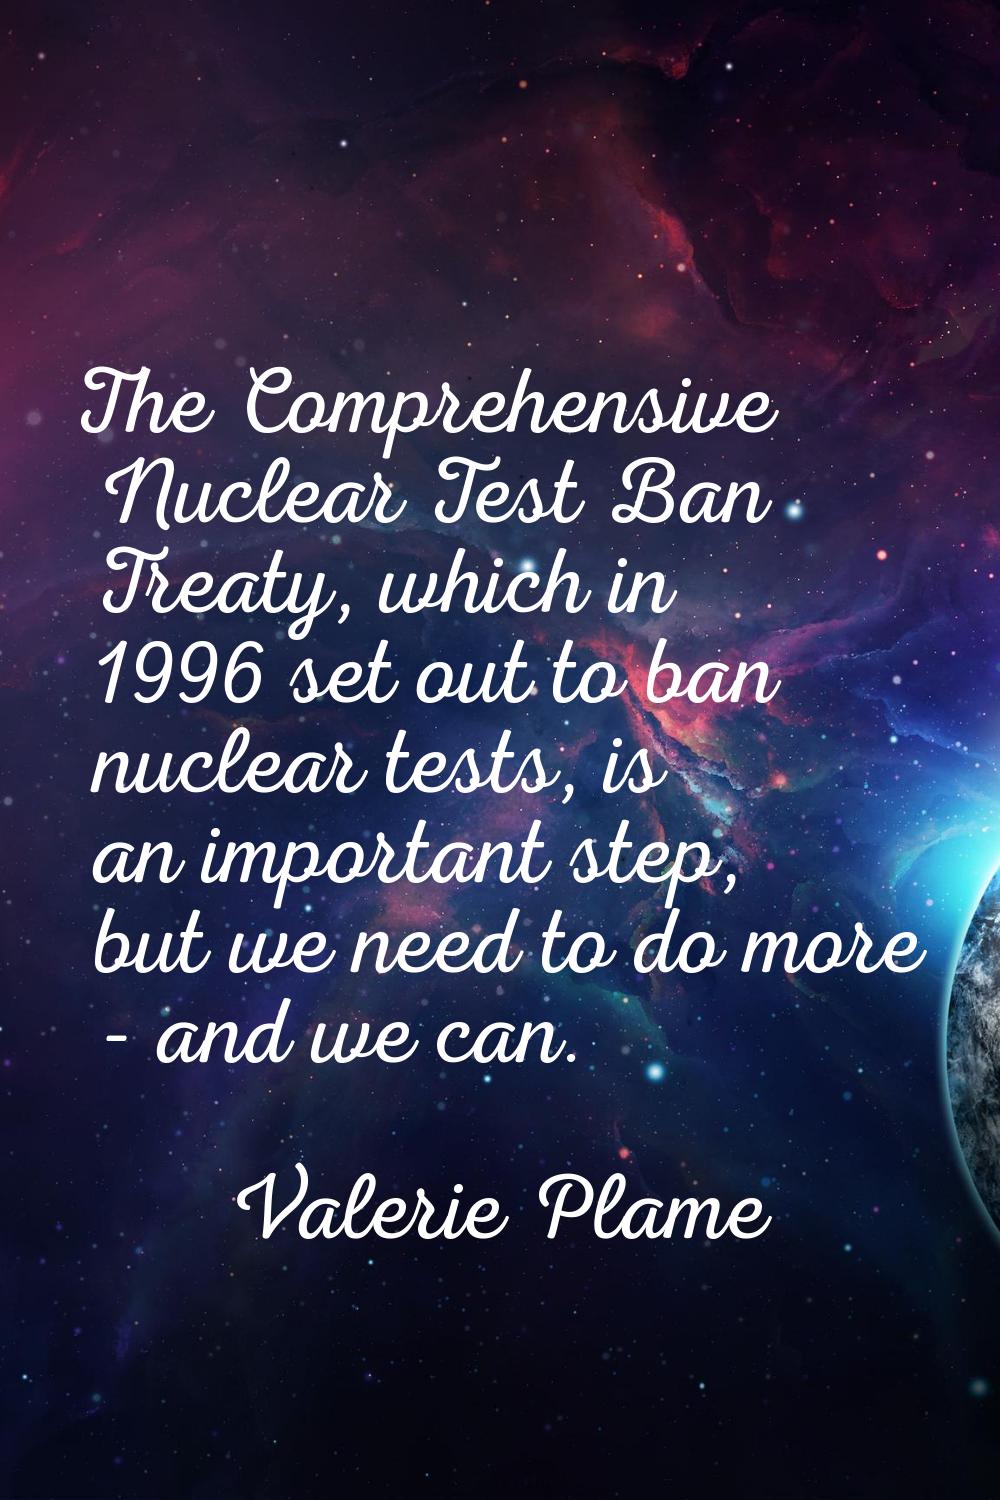 The Comprehensive Nuclear Test Ban Treaty, which in 1996 set out to ban nuclear tests, is an import